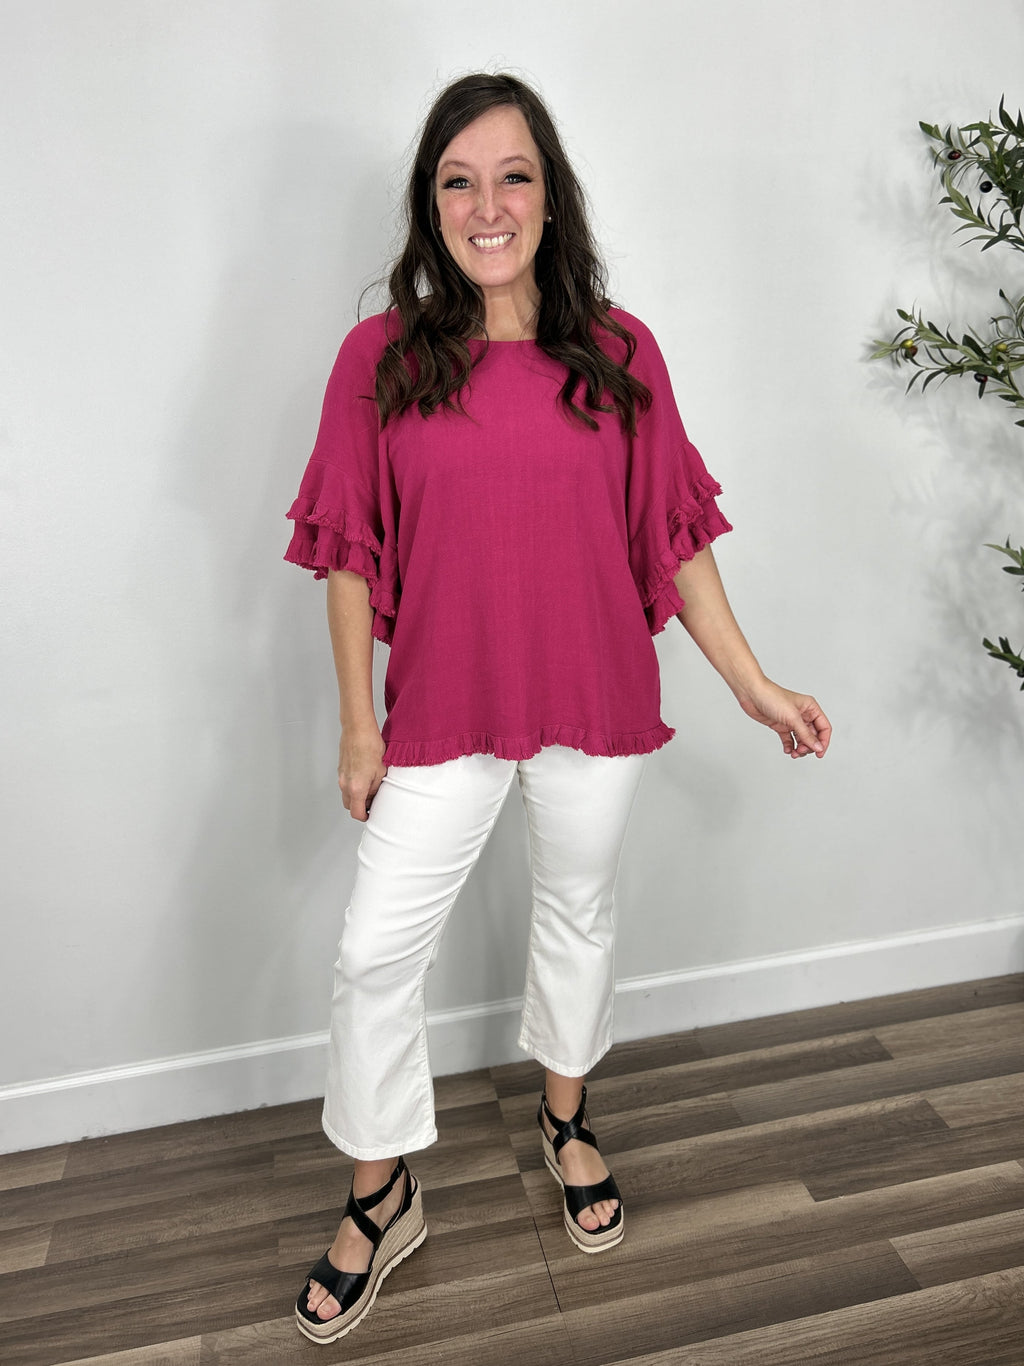 Women's fuchsia Meredith linen ruffle sleeve top paired with white crop pants and black sandals.